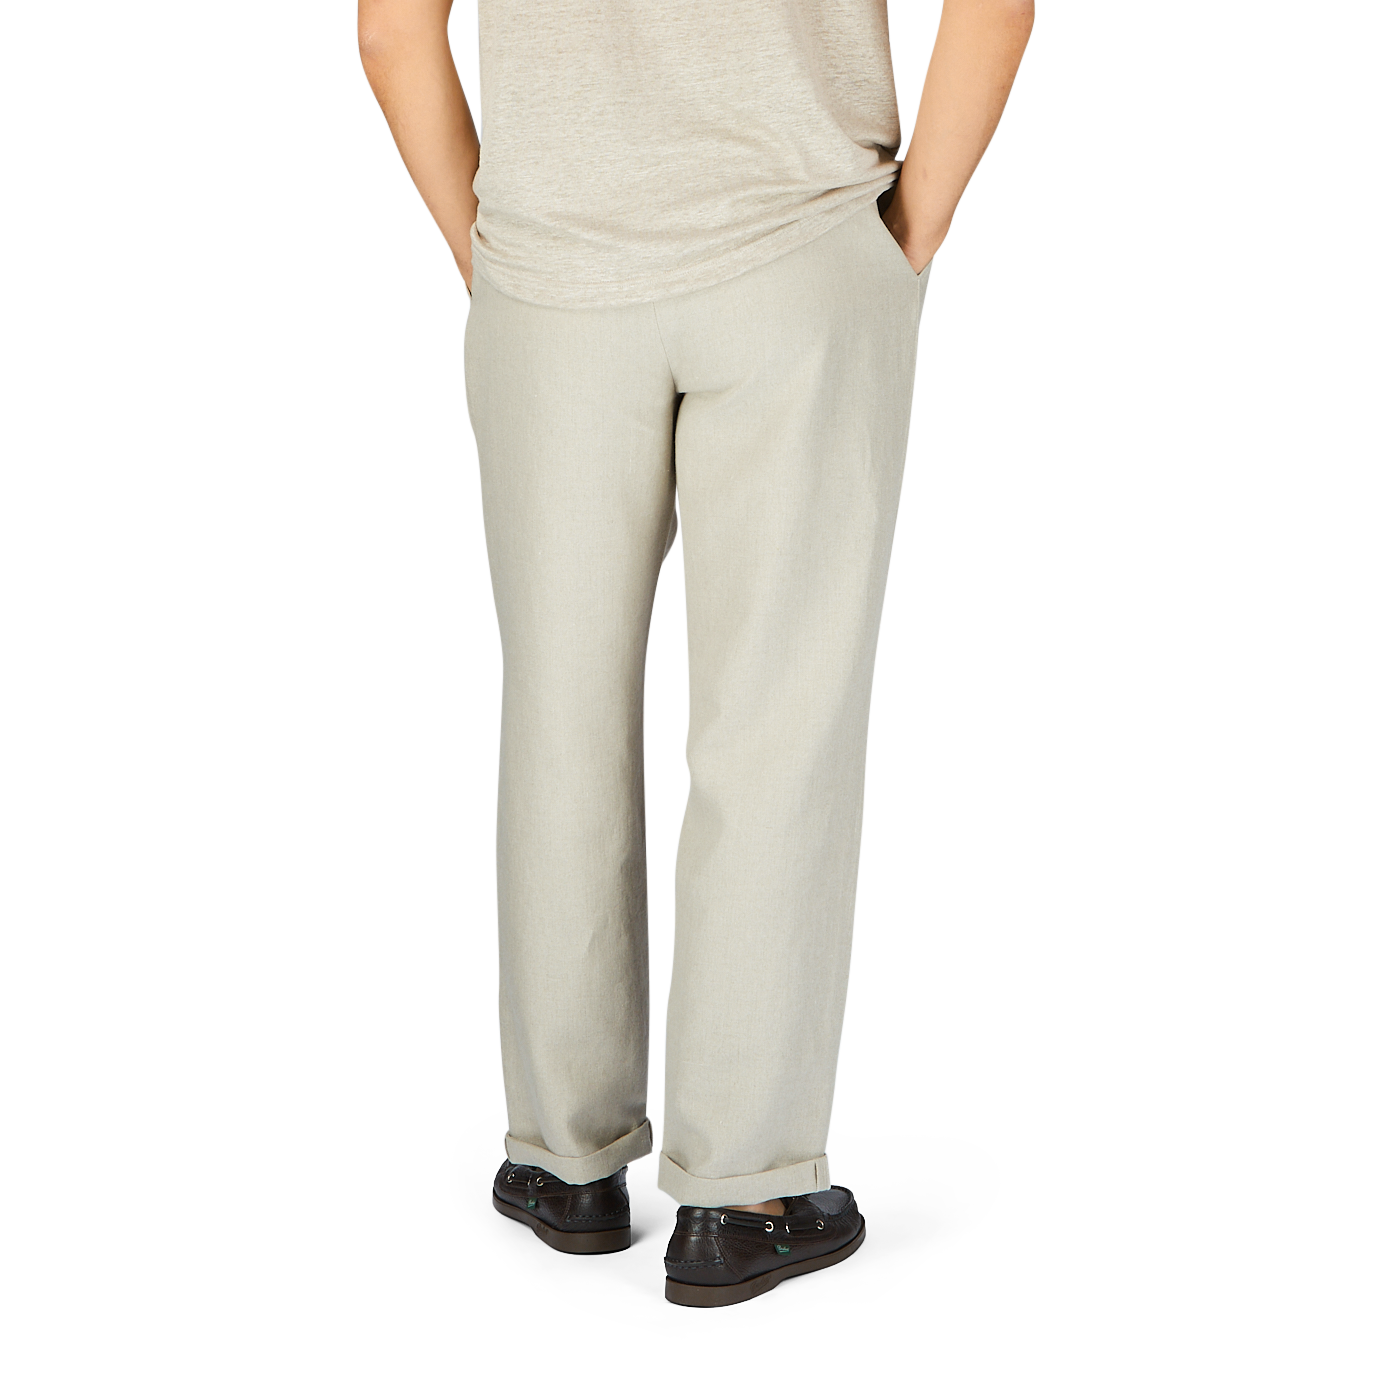 Rear view of a person in De Bonne Facture Oatmeal Beige Linen Pleated Trousers and gray shoes standing against a plain white background.